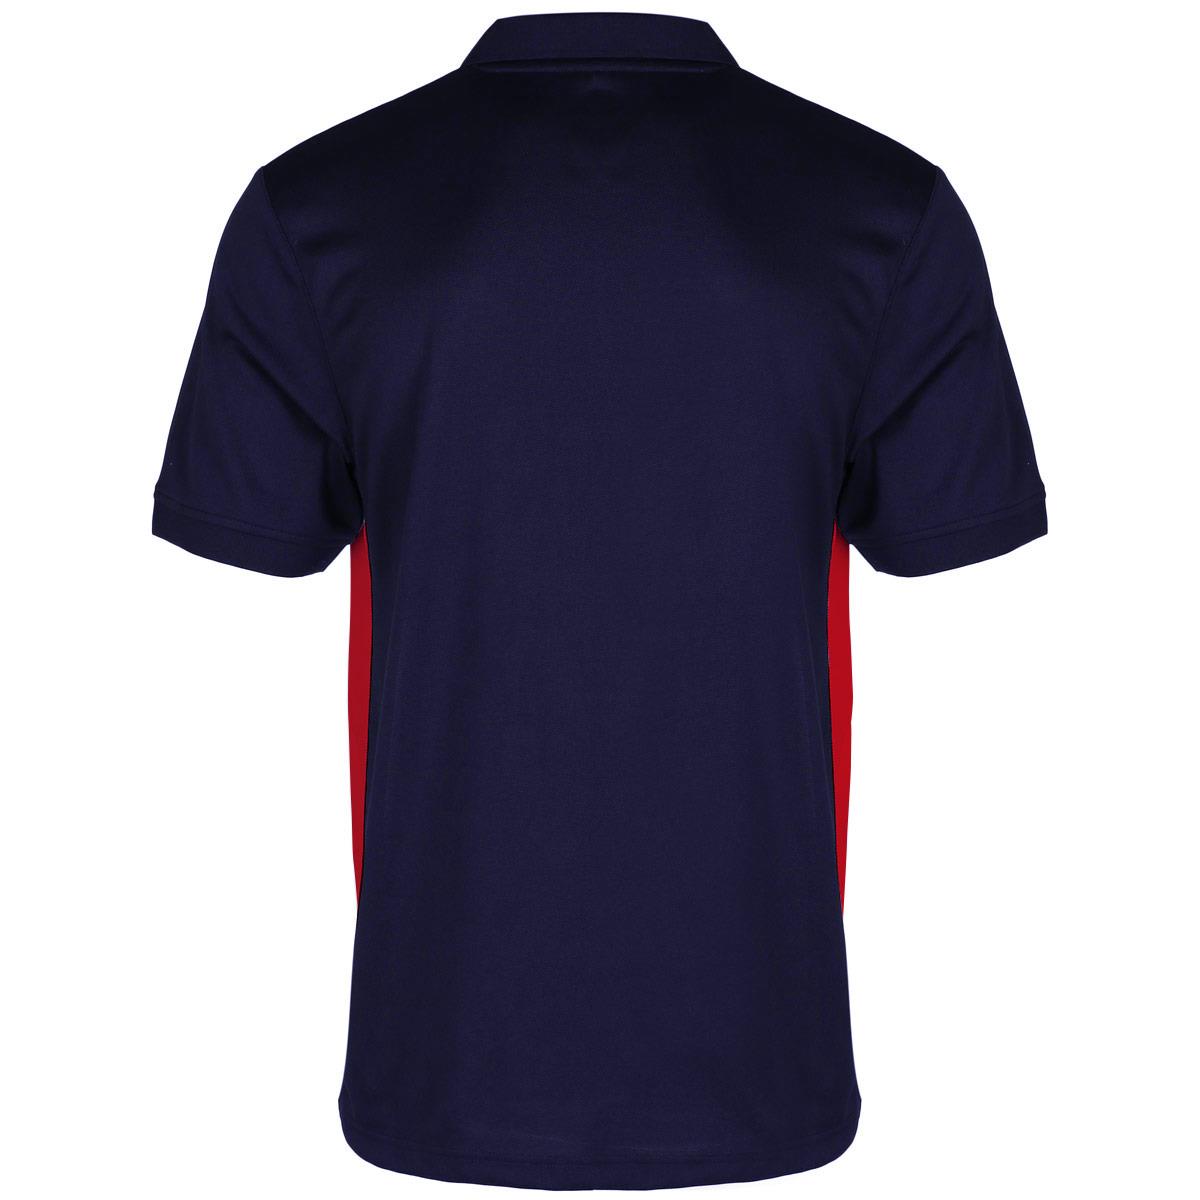 Mens Navy and Red Unbranded Teamwear Premium Polo Shirt | rugbystore